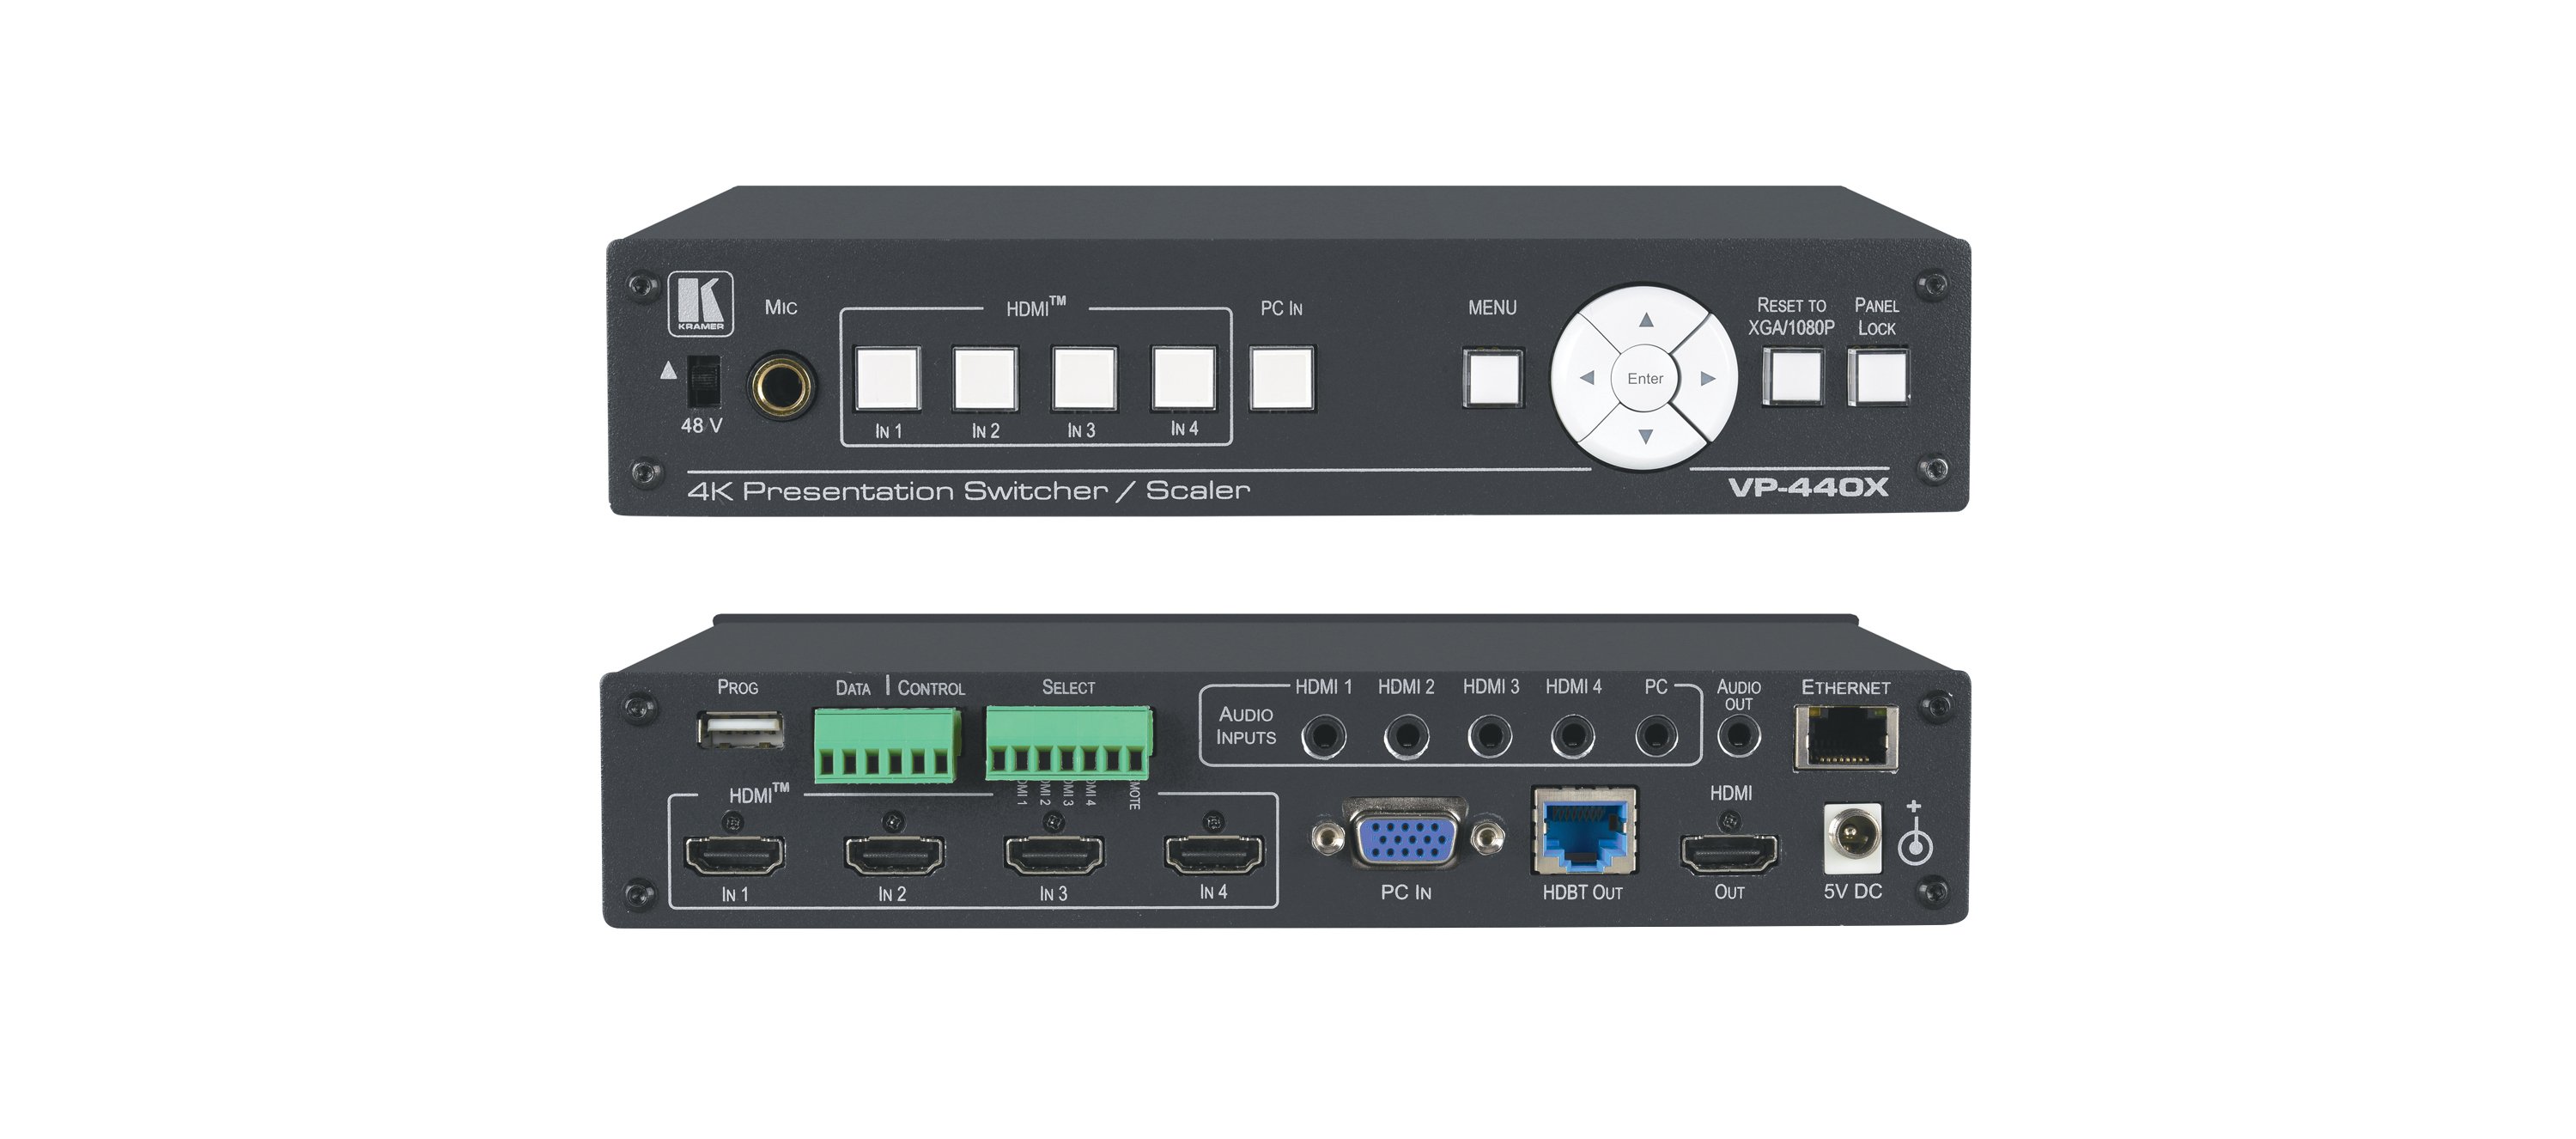 18G 4K Presentation Switcher/Scaler with HDBaseT & HDMI Simultaneous Outputs